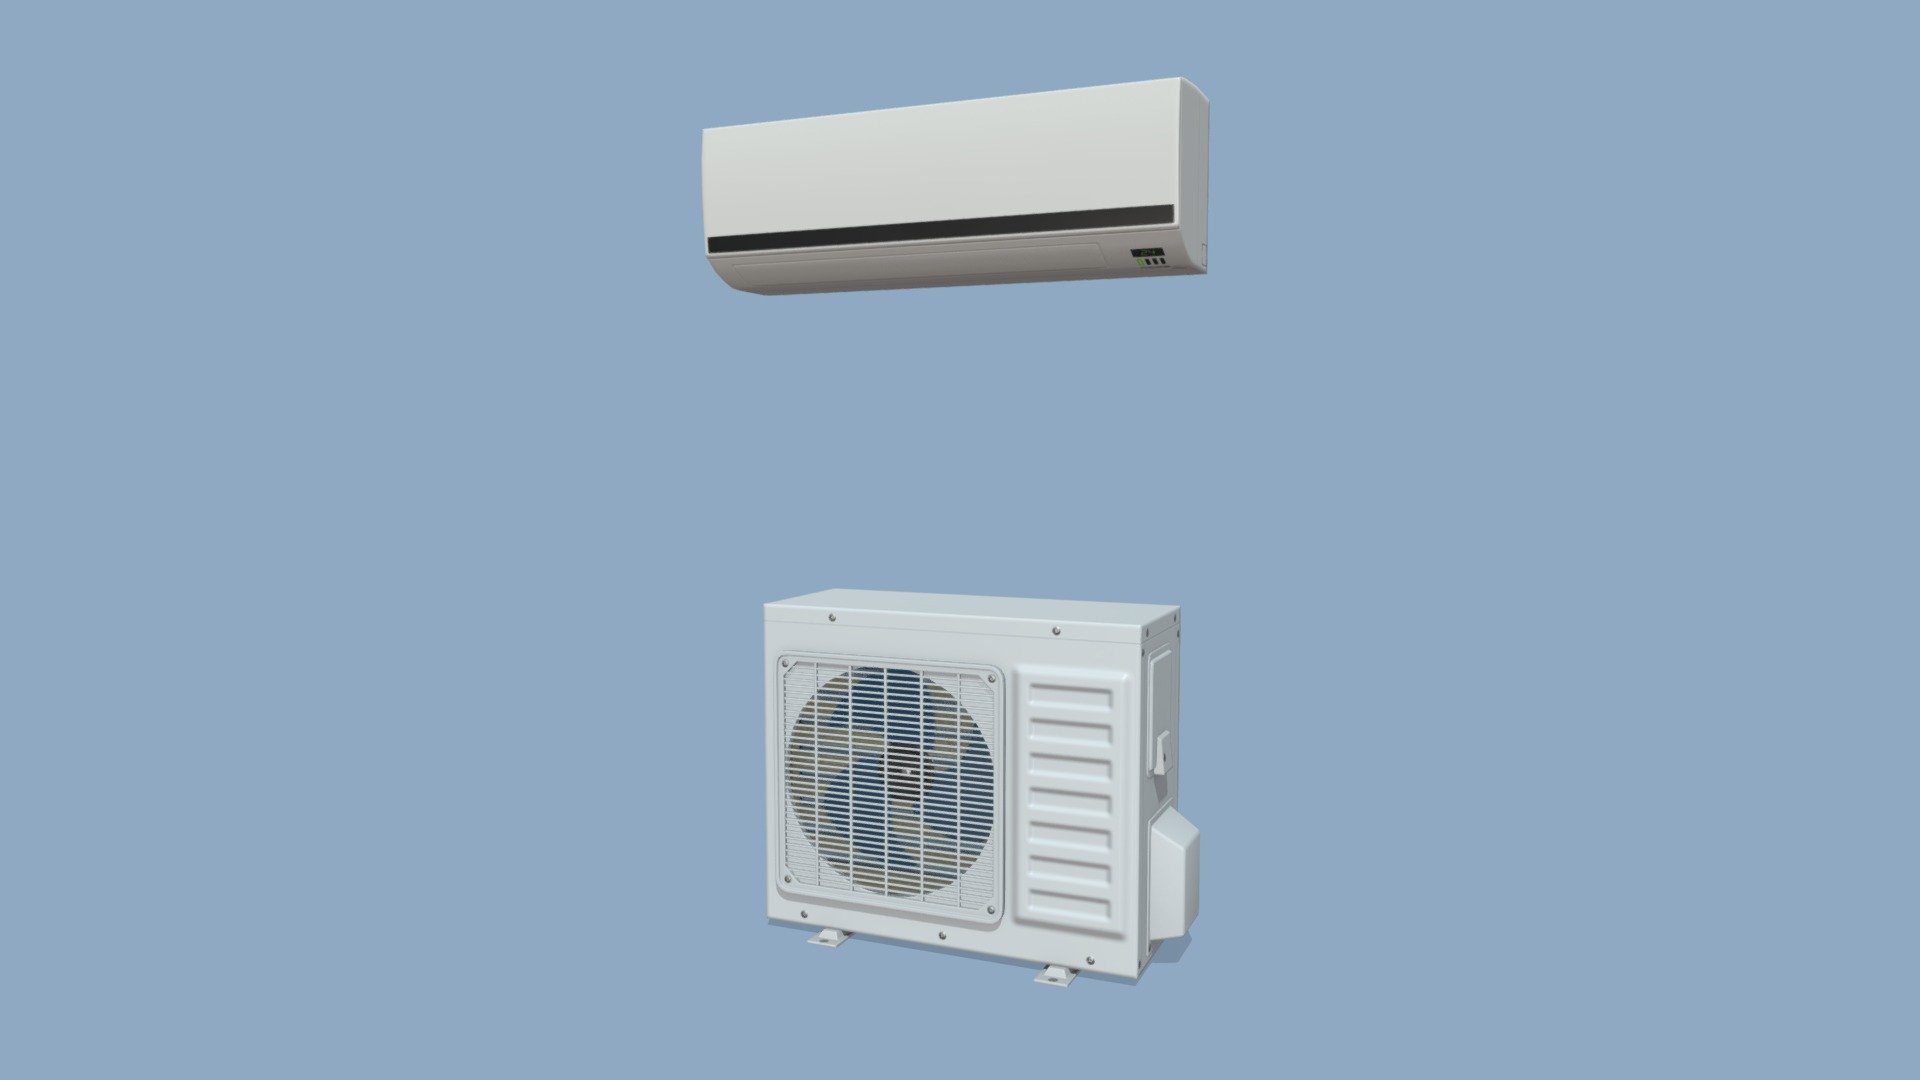 Game ready low-poly Air Conditioner models with PBR textures for game engines/renderers. 

This product is intended for game/real time/background use. This model is not intended for subdivision. Geometry is triangulated. Model unwrapped manually. All materials and objects named appropriately. Scaled to approximate real world size. Tested in Marmoset Toolbag 3. Tested in Unreal Engine 4. Tested in Unity. No special plugins needed. .obj and .fbx versions exported from Blender 2.83.

4096x4096 textures in png format:
- General PBR Metallic/Roughness  textures: BaseColor, Metallic, Roughness, Normal, AO, Emission;
- Unity Textures: Albedo, MetallicSmoothness, Normal, AO, Emission;
- Unreal Engine 4 textures: BaseColor, OcclusionRoughnessMetallic, Normal, Emission;
- PBR Specular/Glossiness textures: Diffuse, Specular, Glossiness, Normal, AO, Emission 3d model